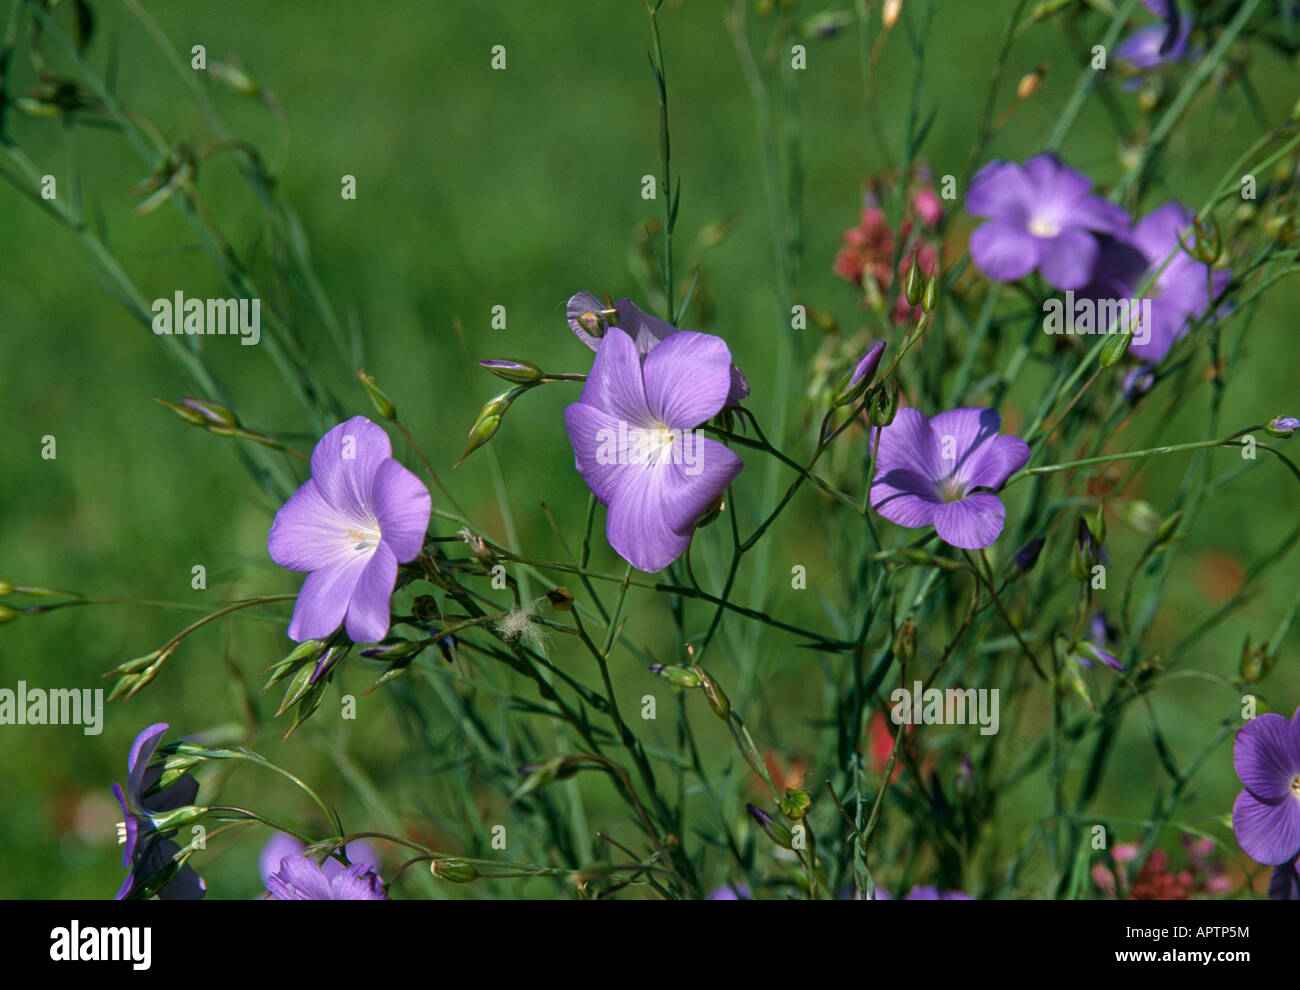 Linum perenne blue slender a sunlit meadow in summer Stock Photo